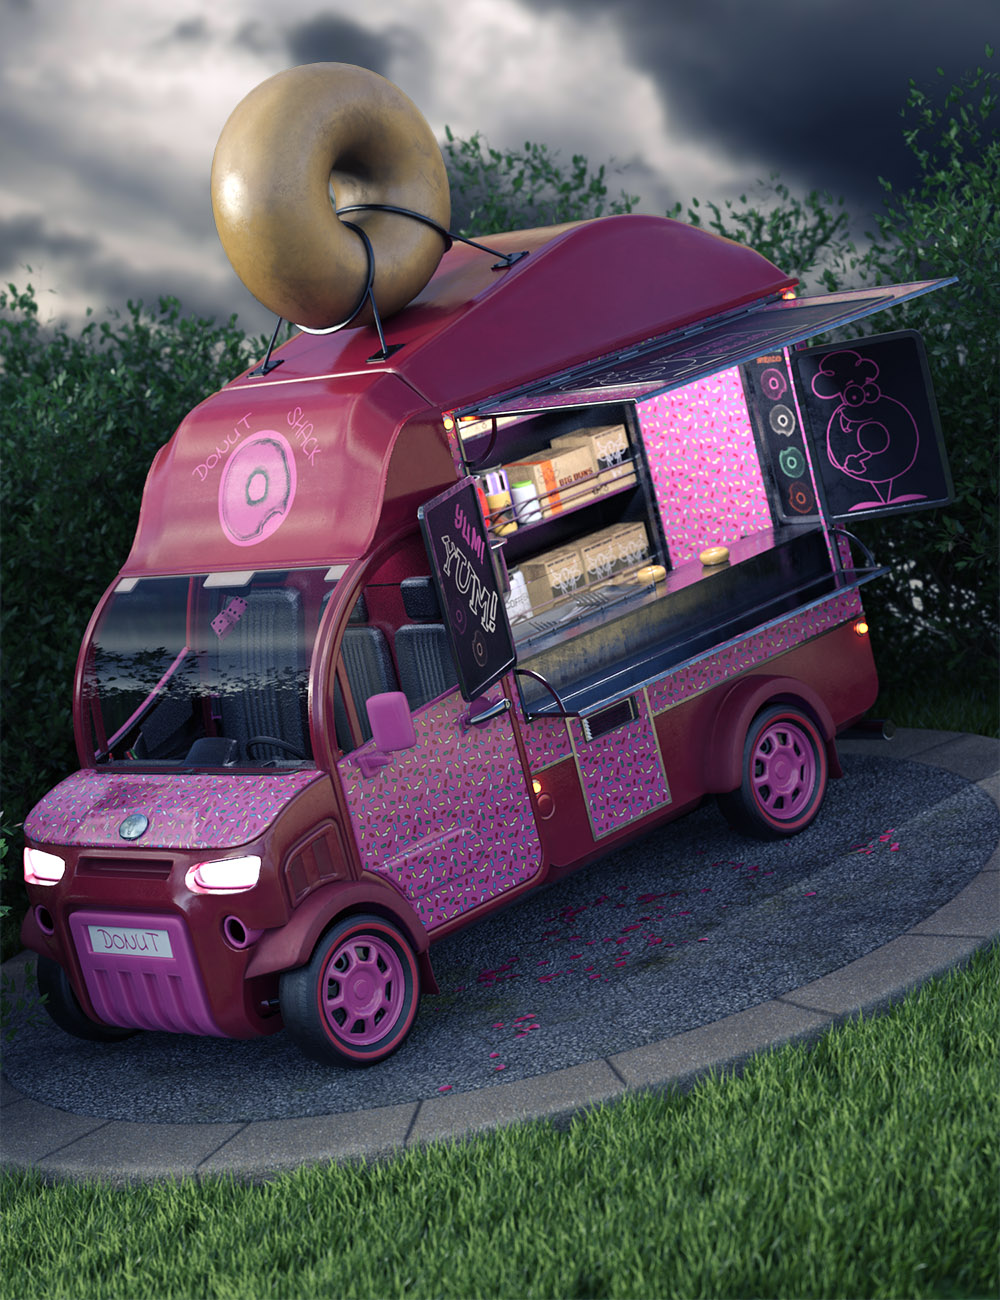 Catering Truck Baked Goods Expansion by: ForbiddenWhispersDavid Brinnen, 3D Models by Daz 3D